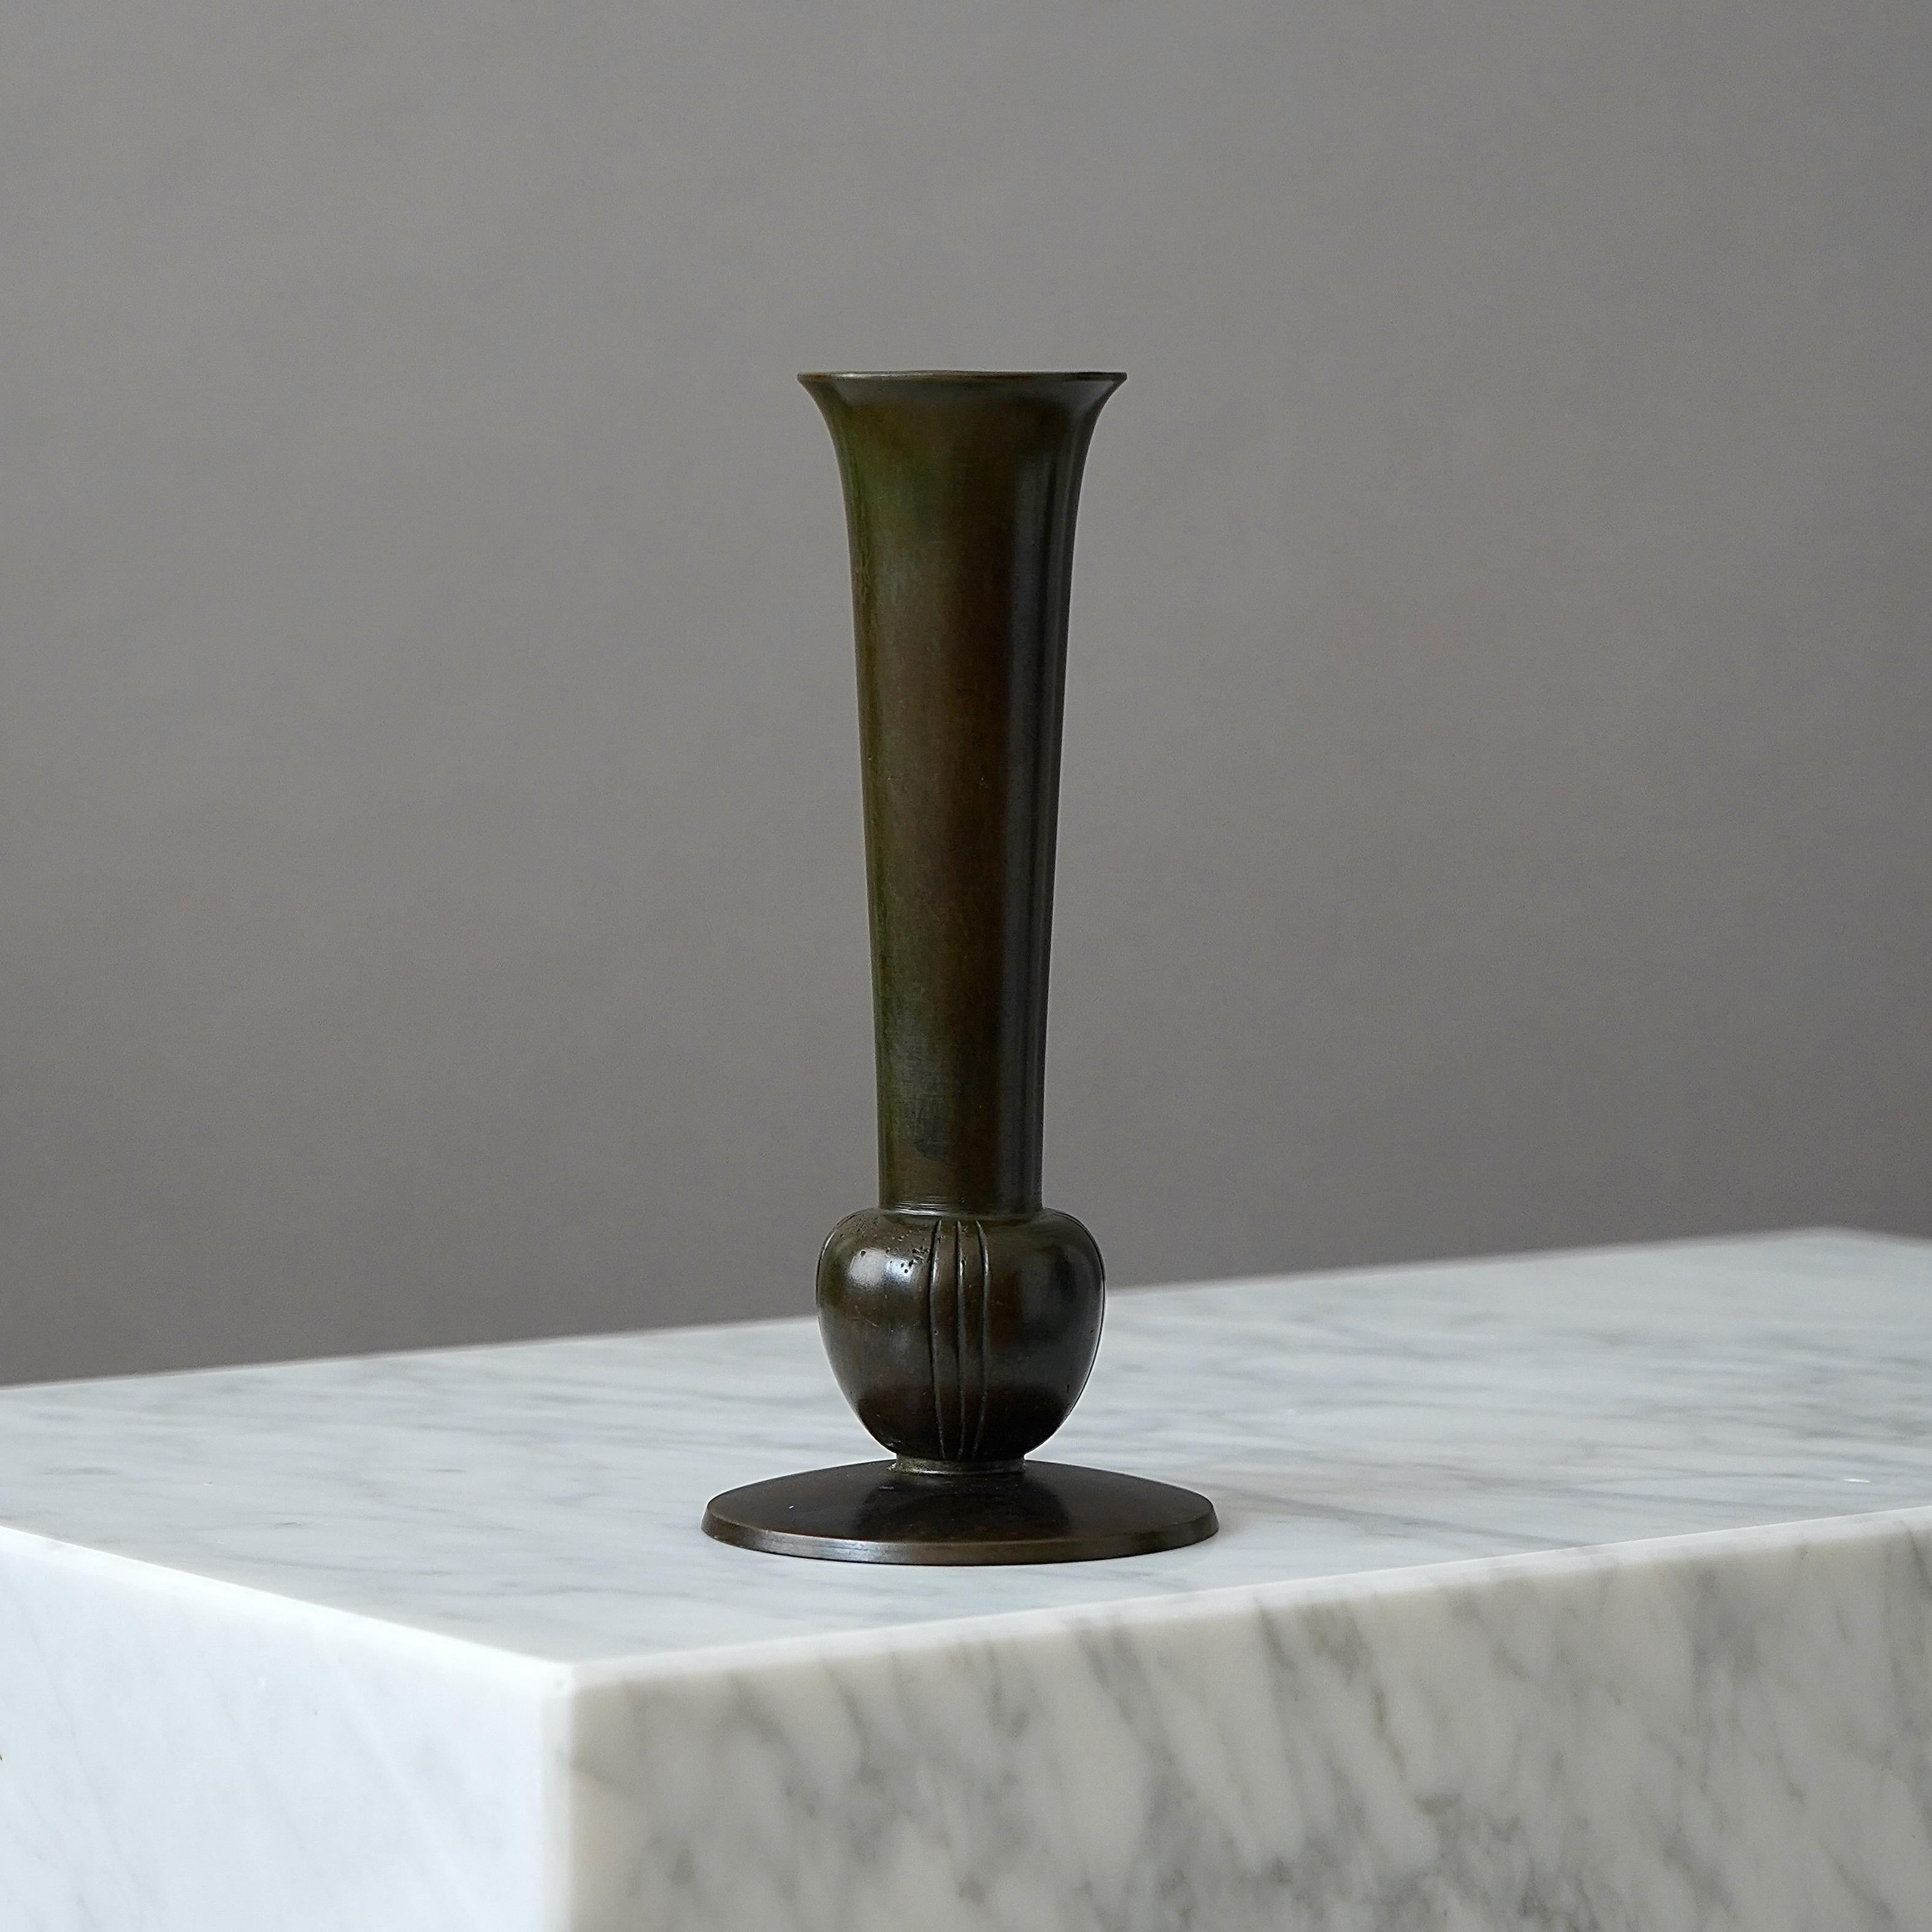 A beautiful bronze vase with amazing patina. 
Made by GAB Guldsmedsaktiebolaget, Sweden, 1930s.  

Great condition, with a few light scratches.
Stamped 'BRONS', model number '312' and makers mark.